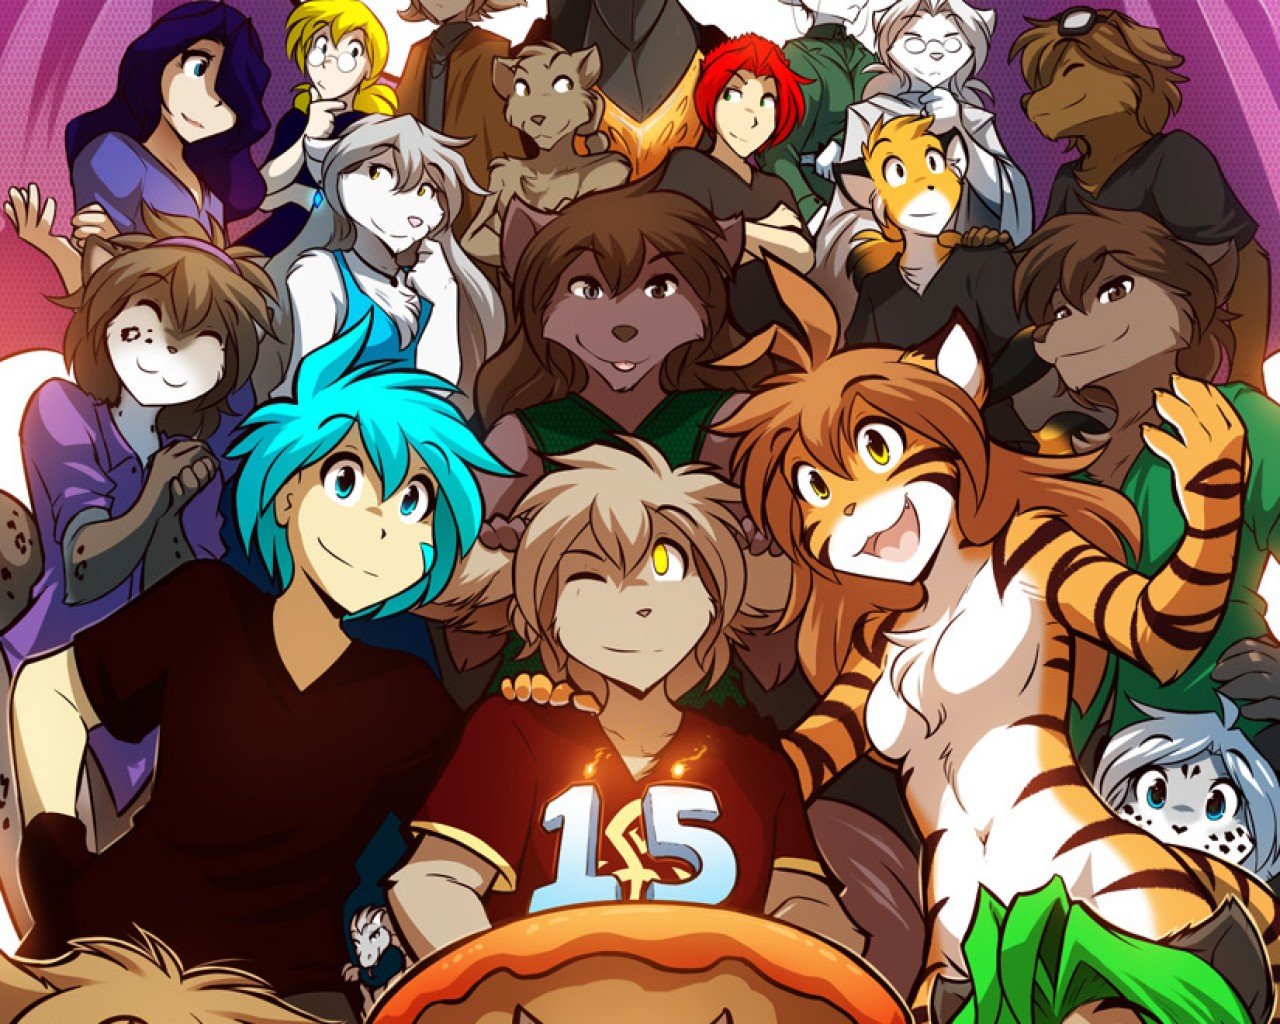 Poster Image for TwoKinds